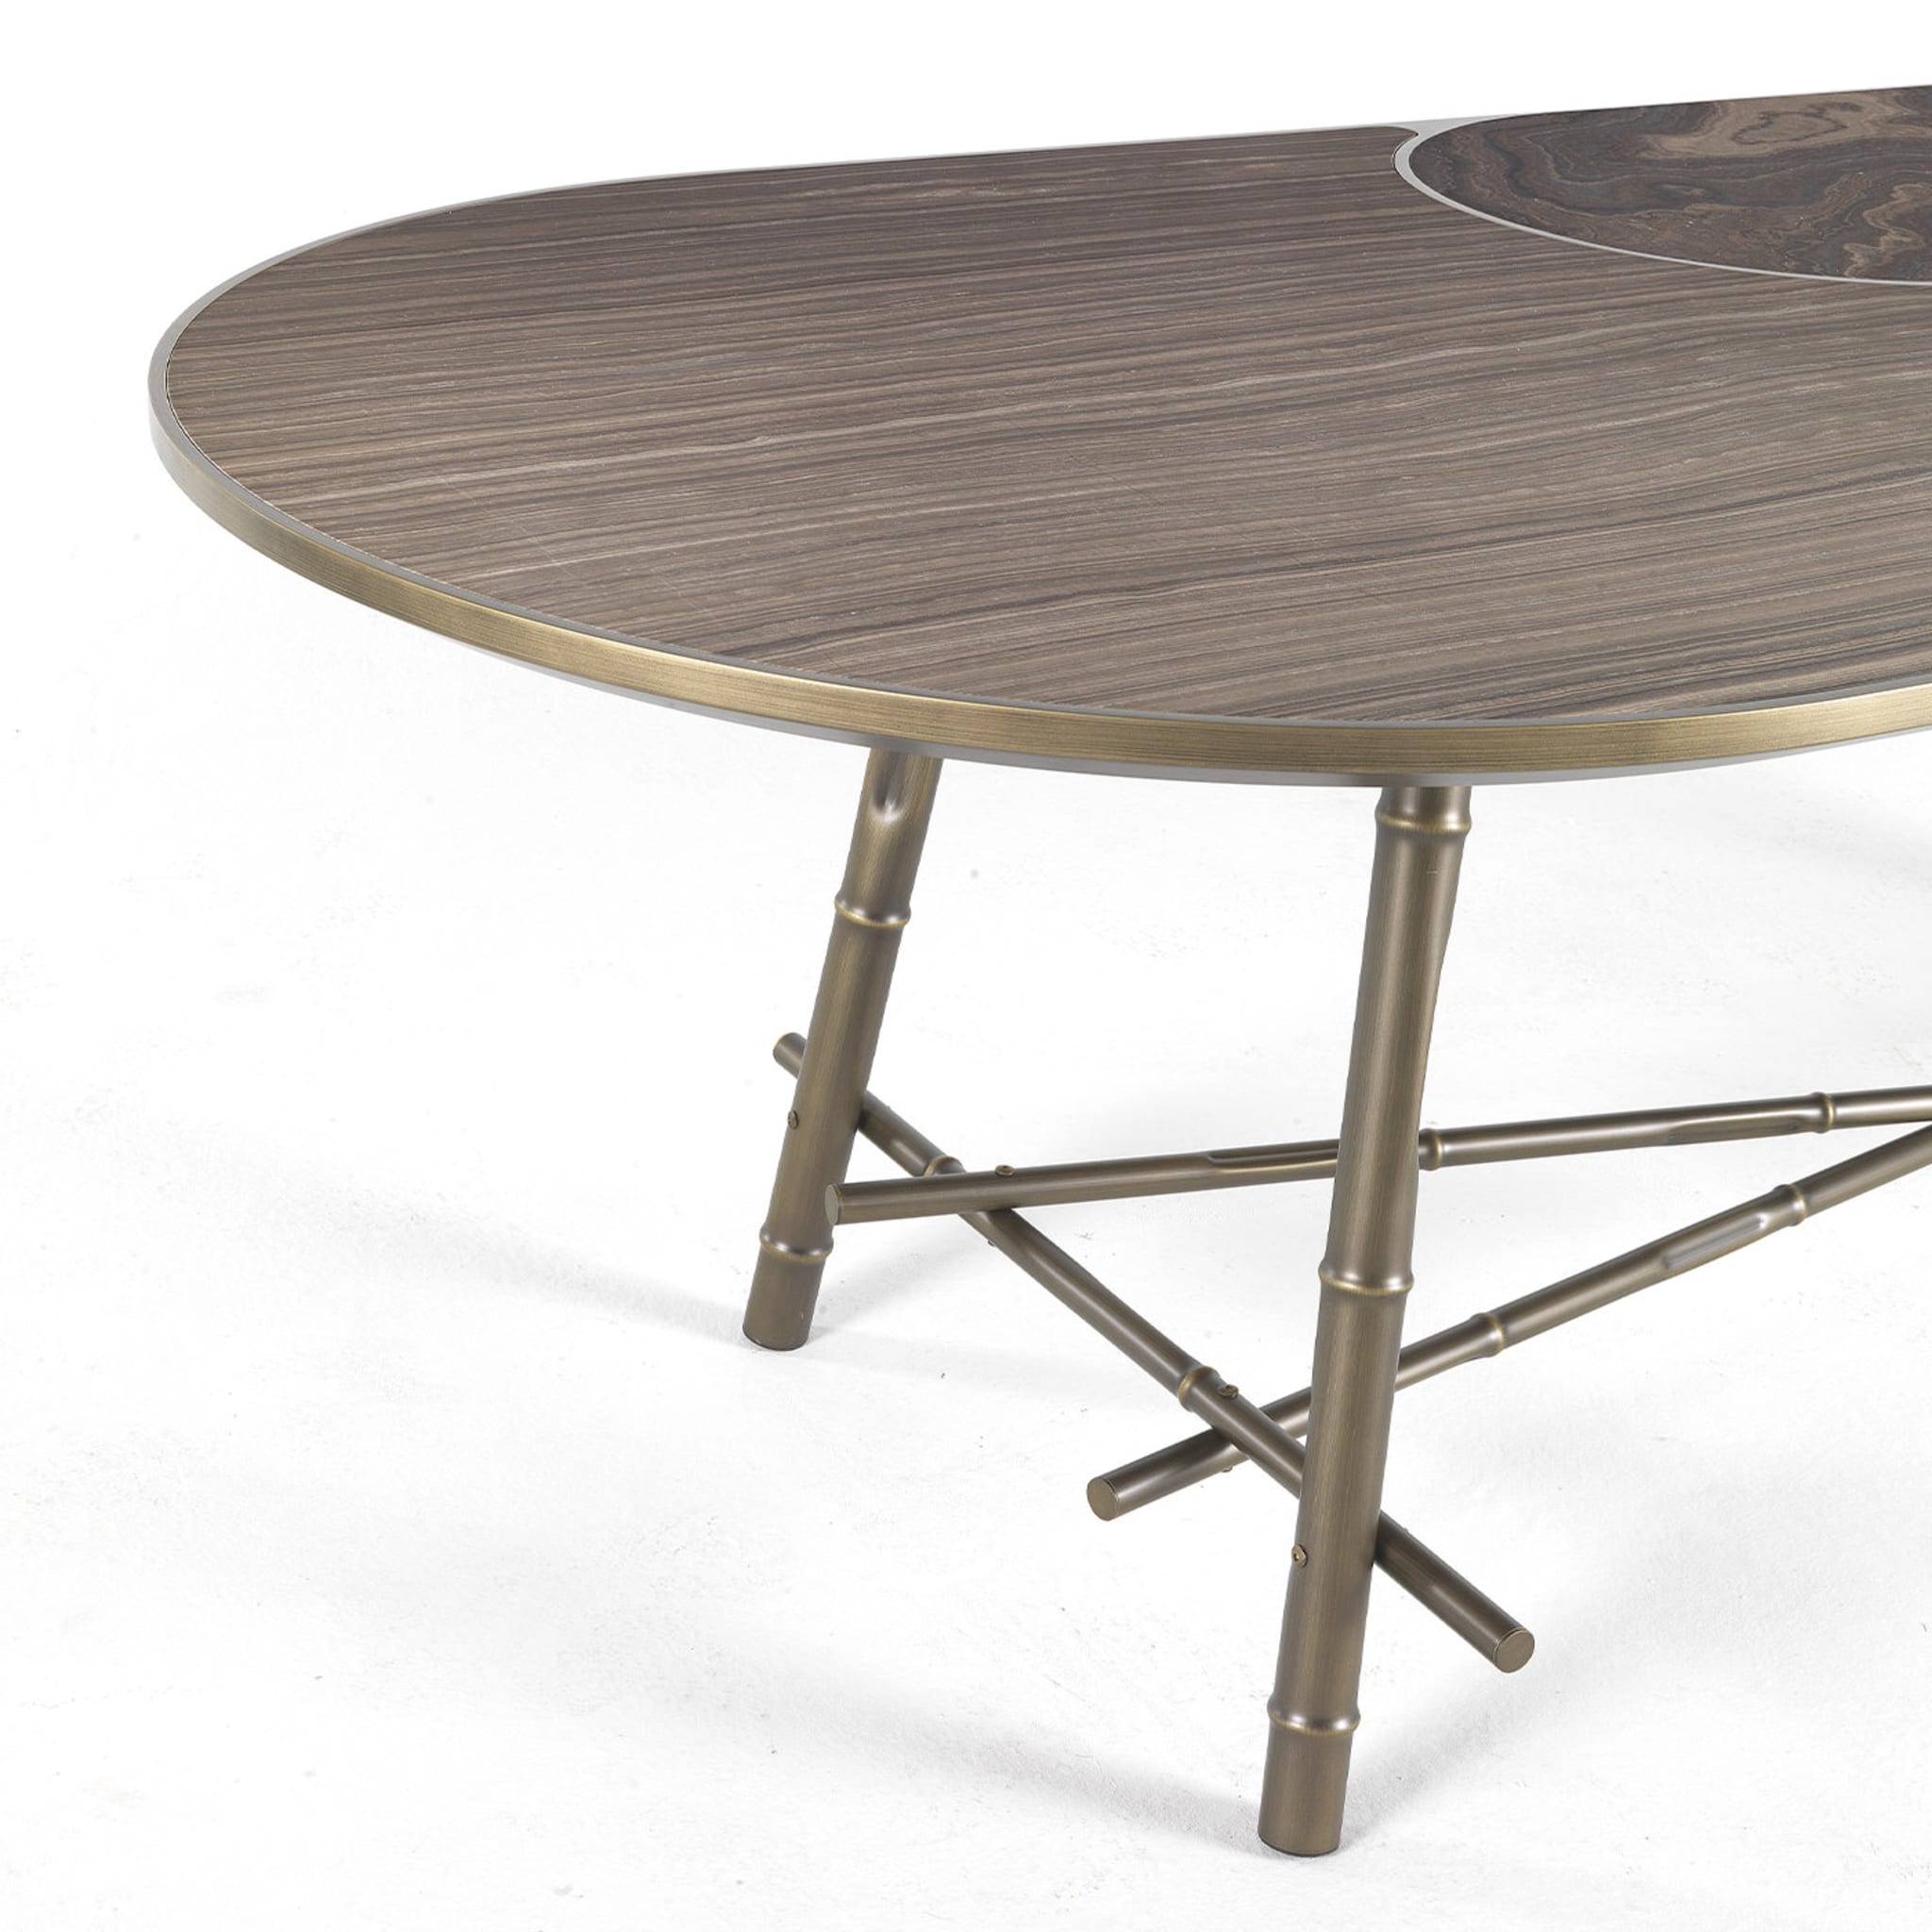 Dalì Oval Dining Table - Alternative view 4